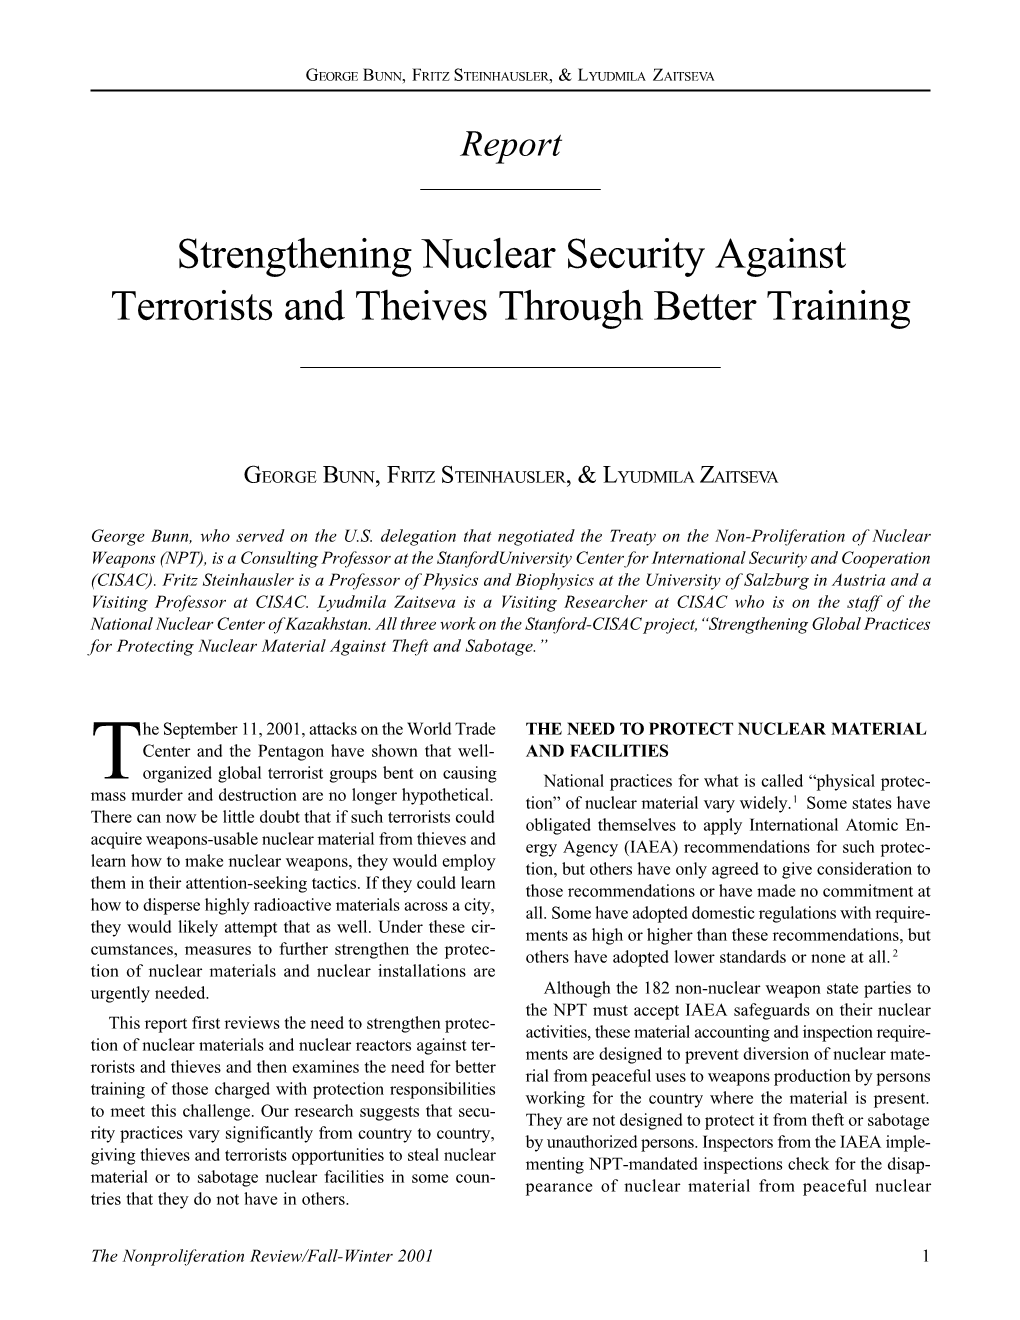 Strengthening Nuclear Security Against Terrorists and Theives Through Better Training